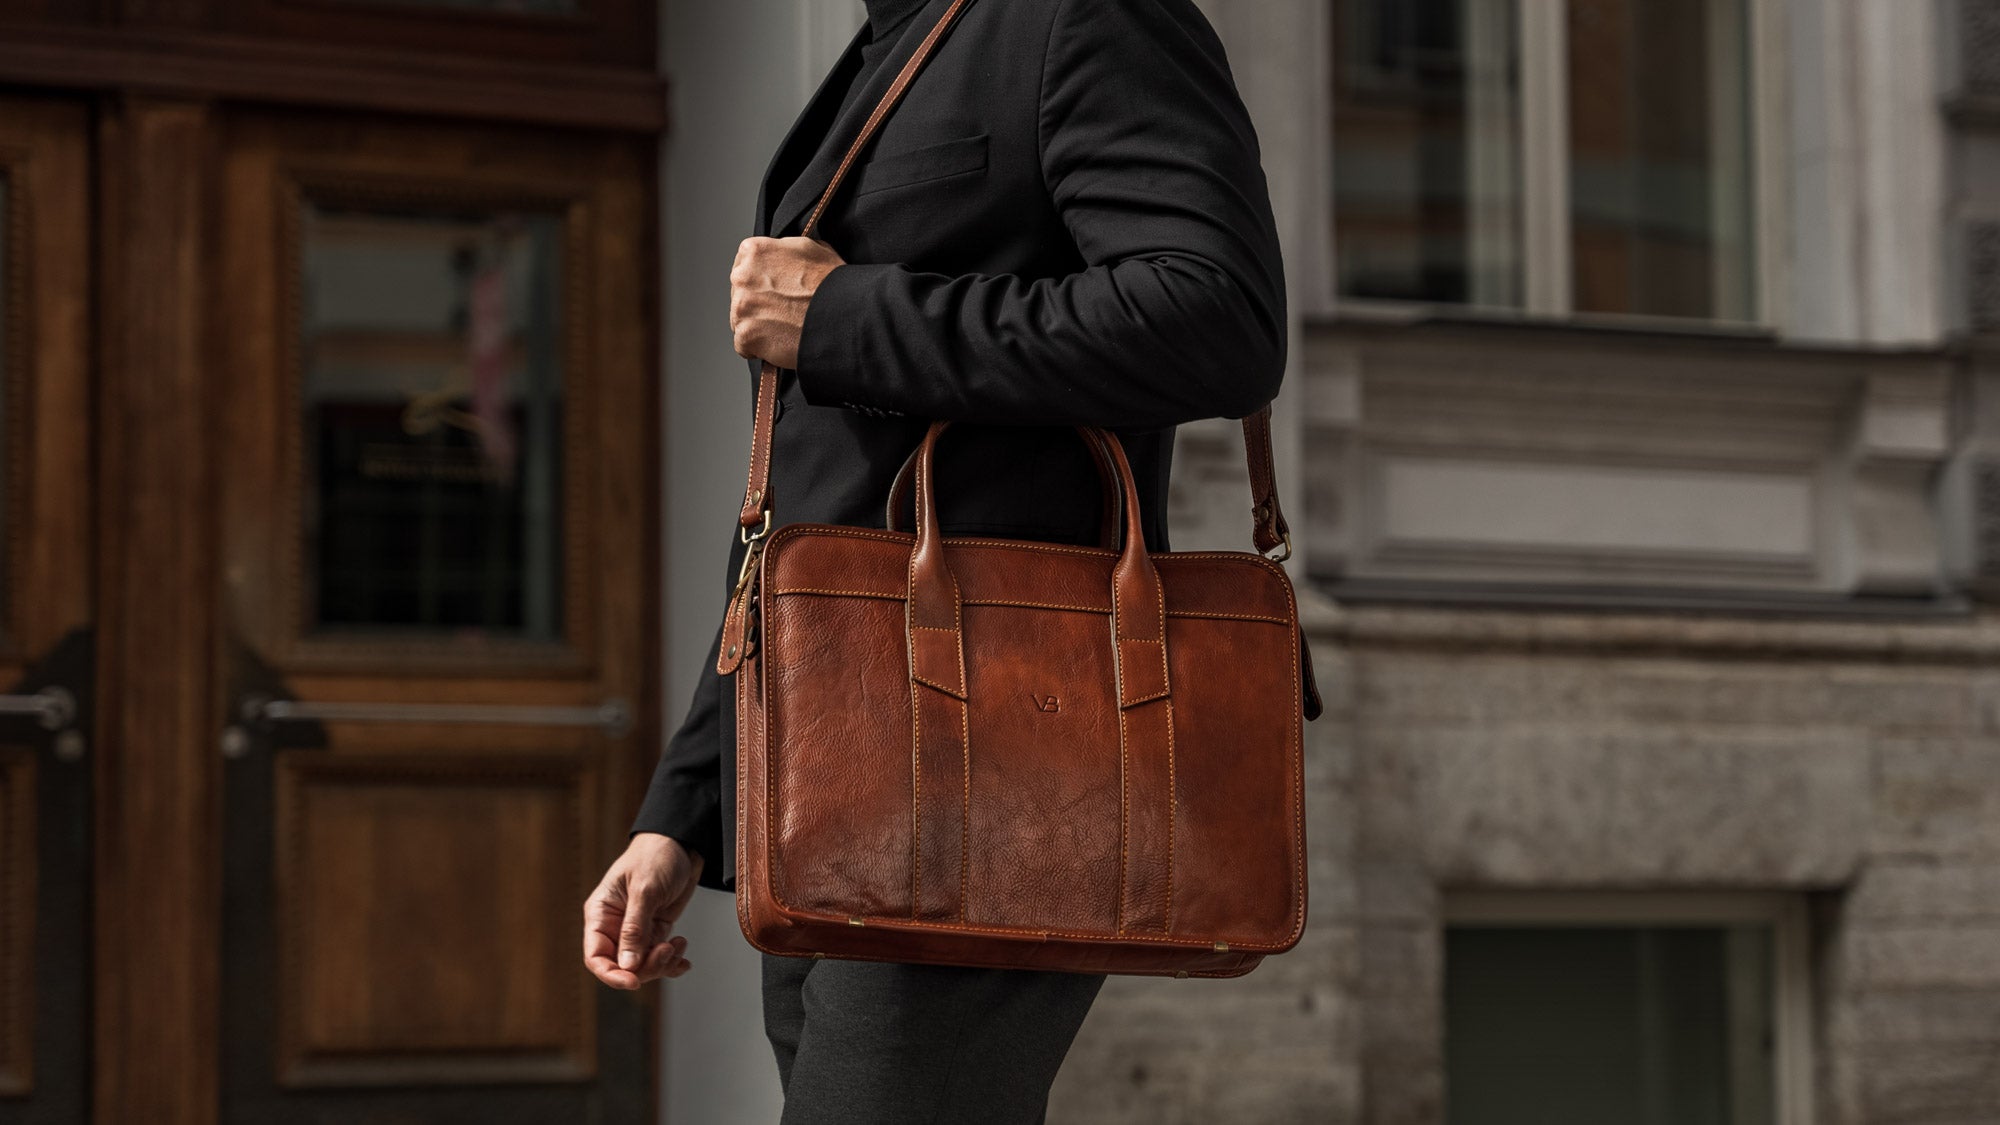 Slim Leather Laptop Bag for Men with14 inch Laptop Compartment - Von Baer